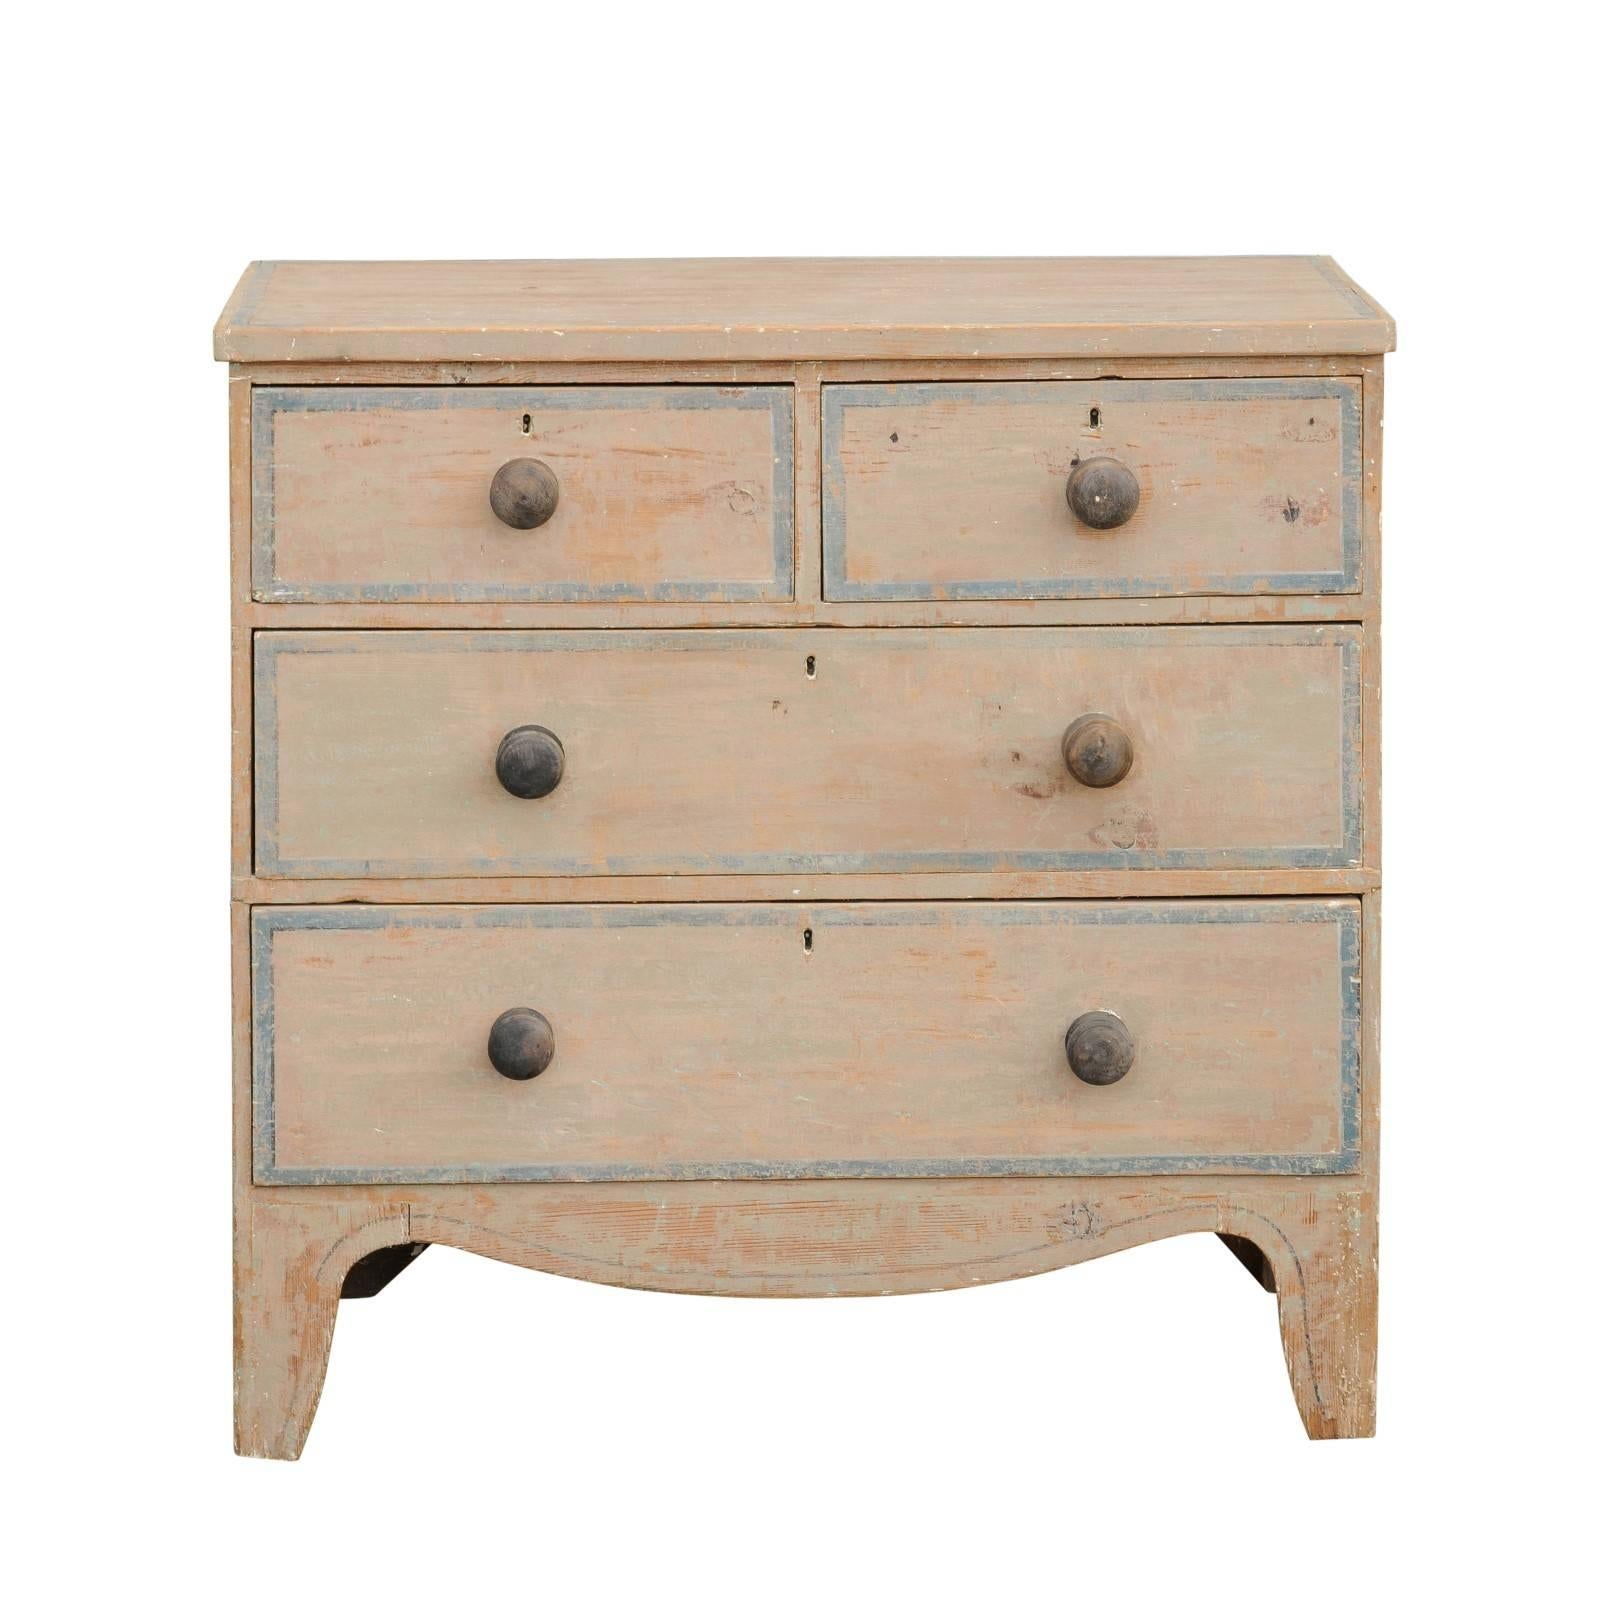 English 1840s Four-Drawer Chest with Original Paint and Valanced Skirt